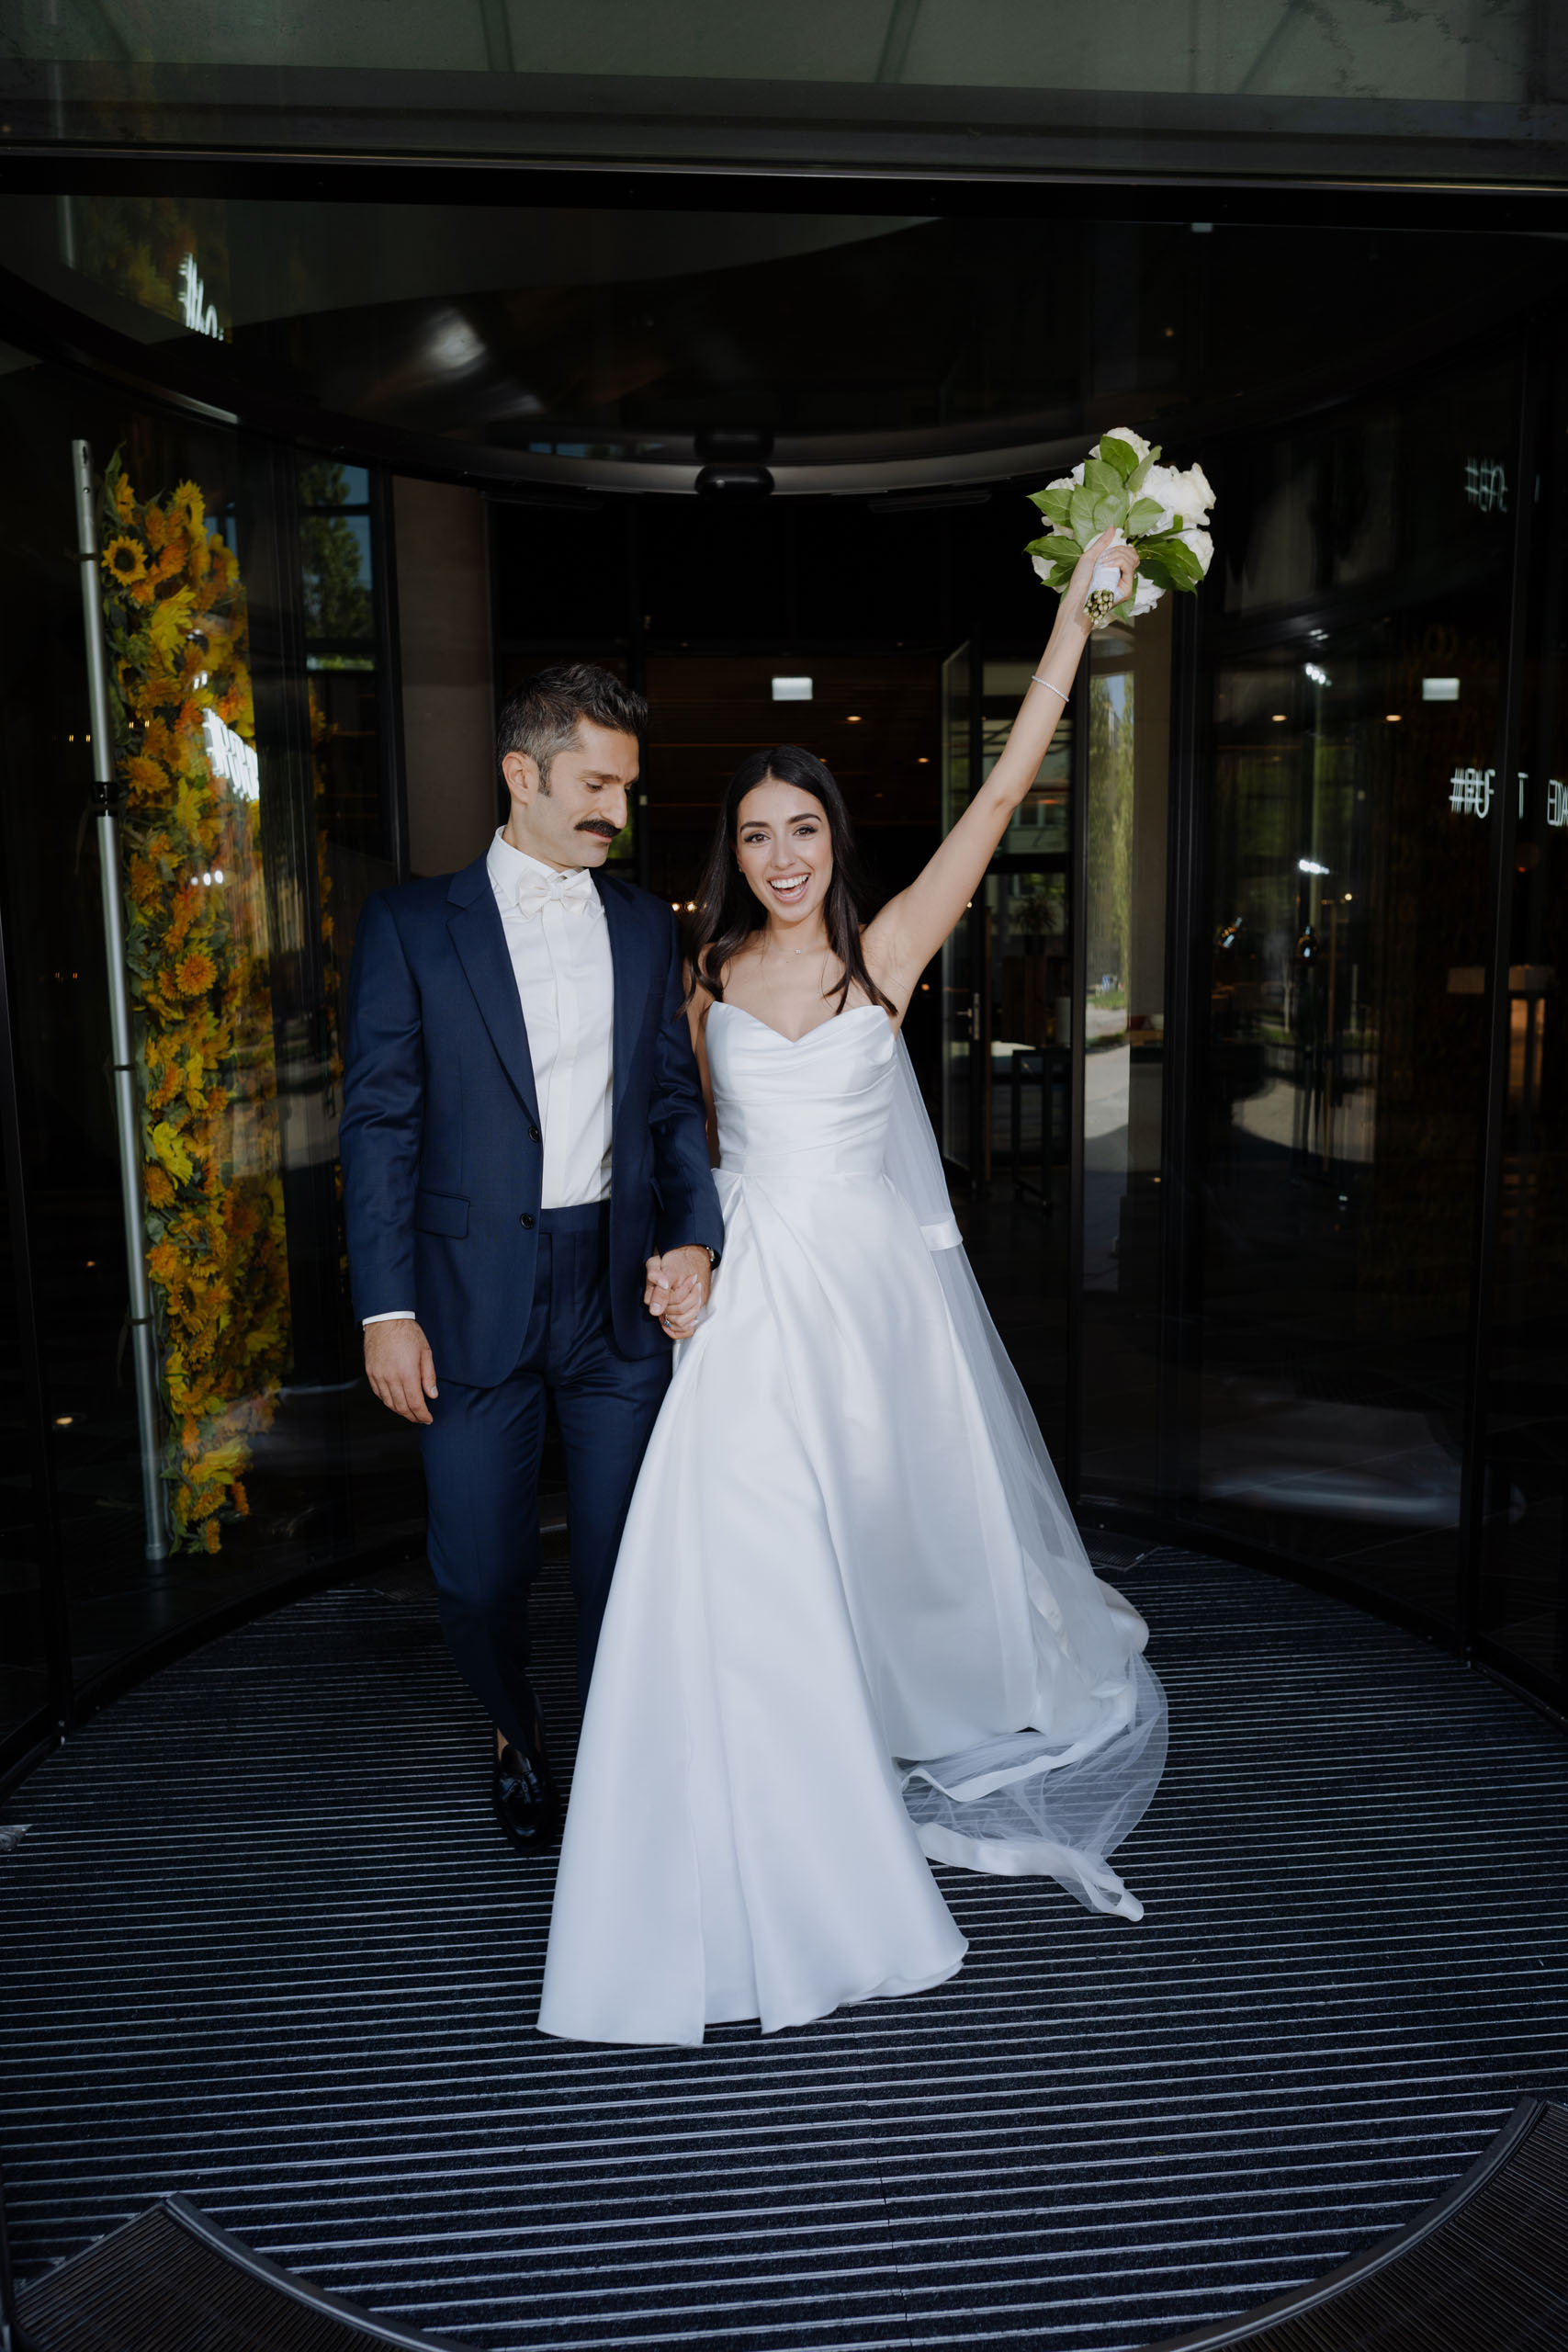 modern wedding photography in munich and tegernsee13h25m rn101072